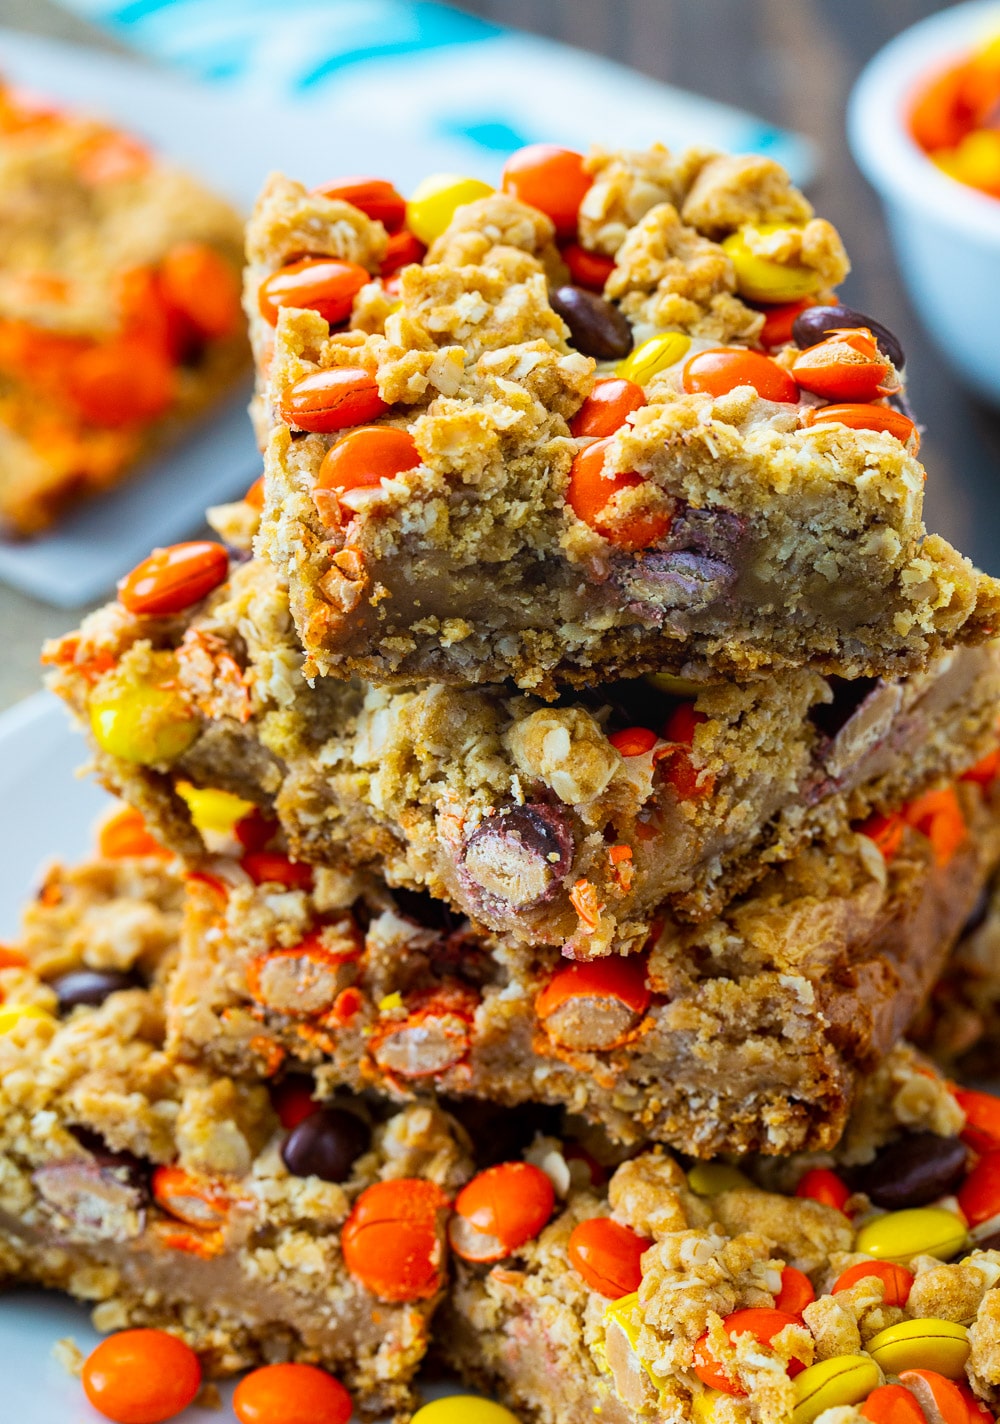 Stack of Reese's Pieces Peanut Butter Oatmeal Bars.